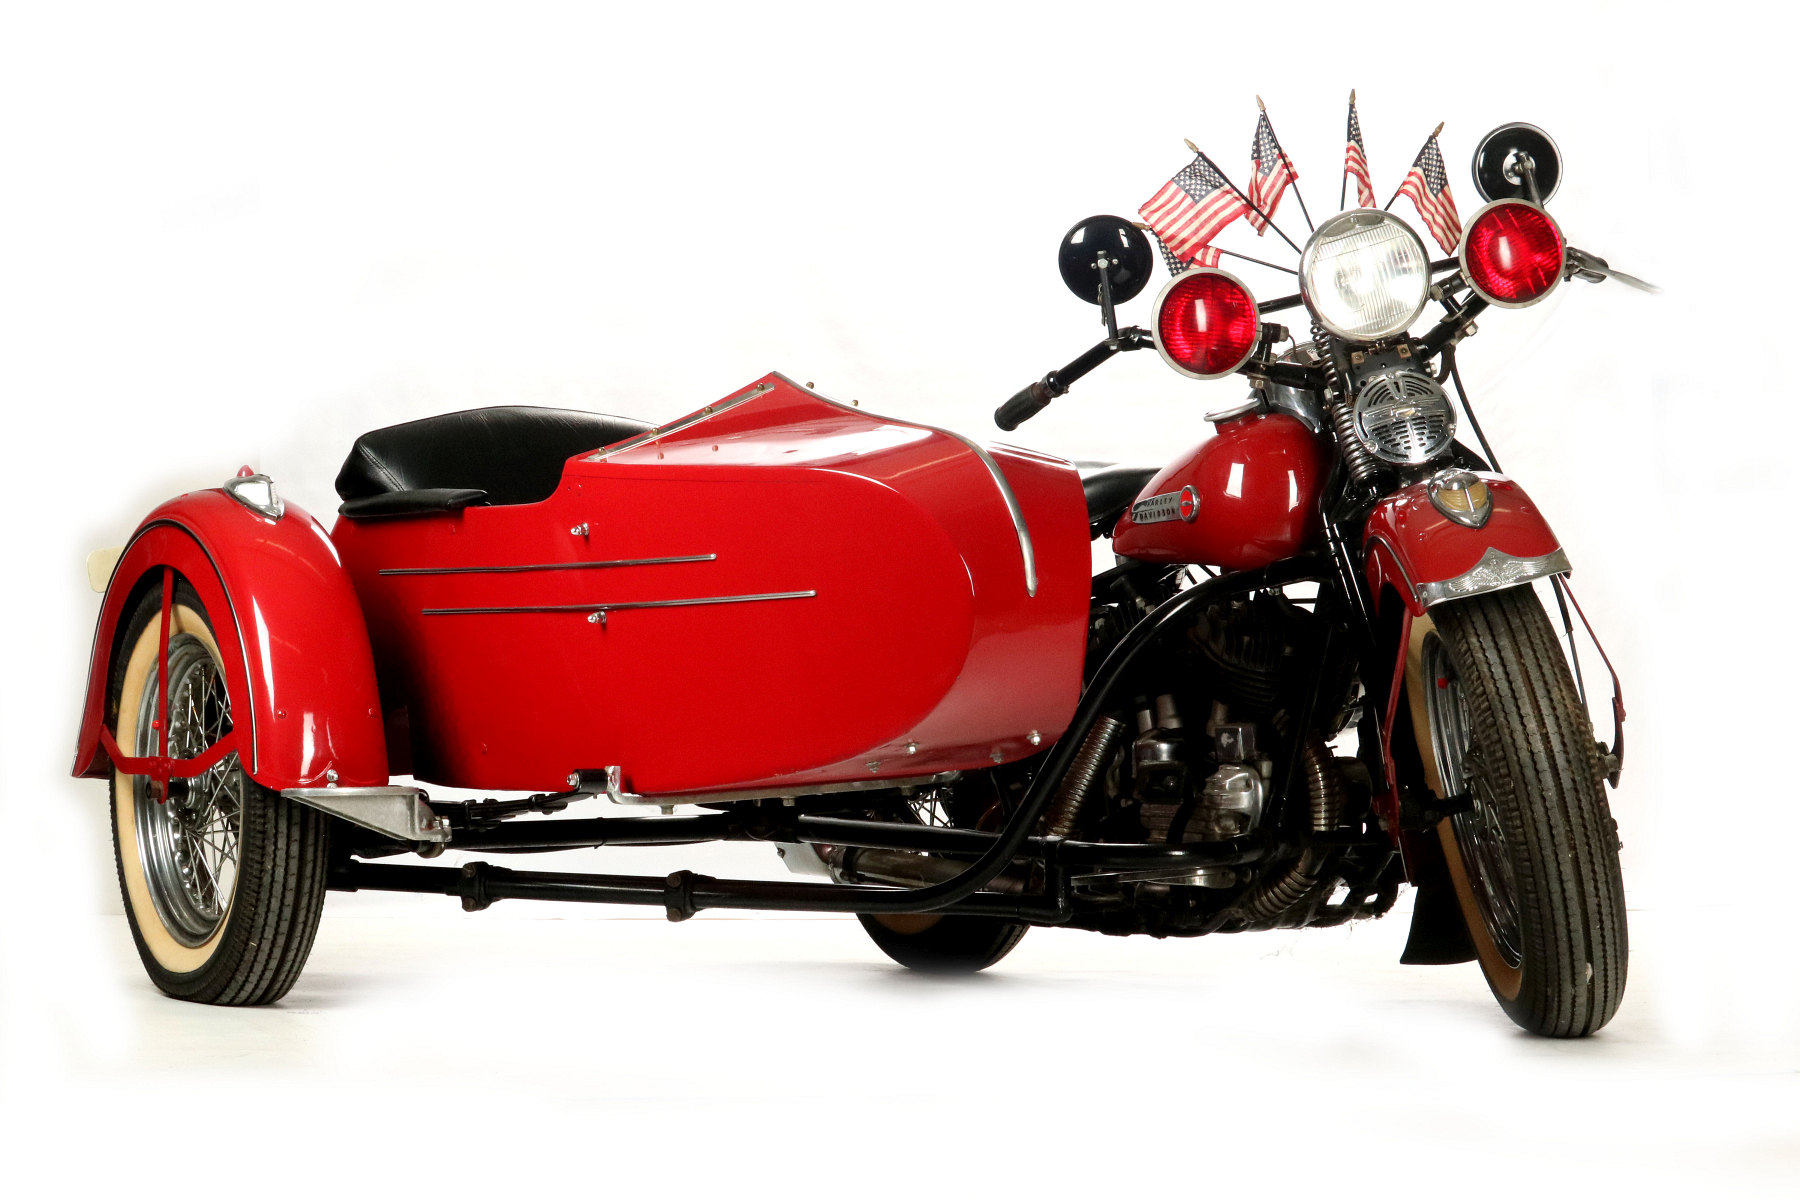 A 1948 HARLEY DAVIDSON MOTORCYCLE WITH SIDECAR